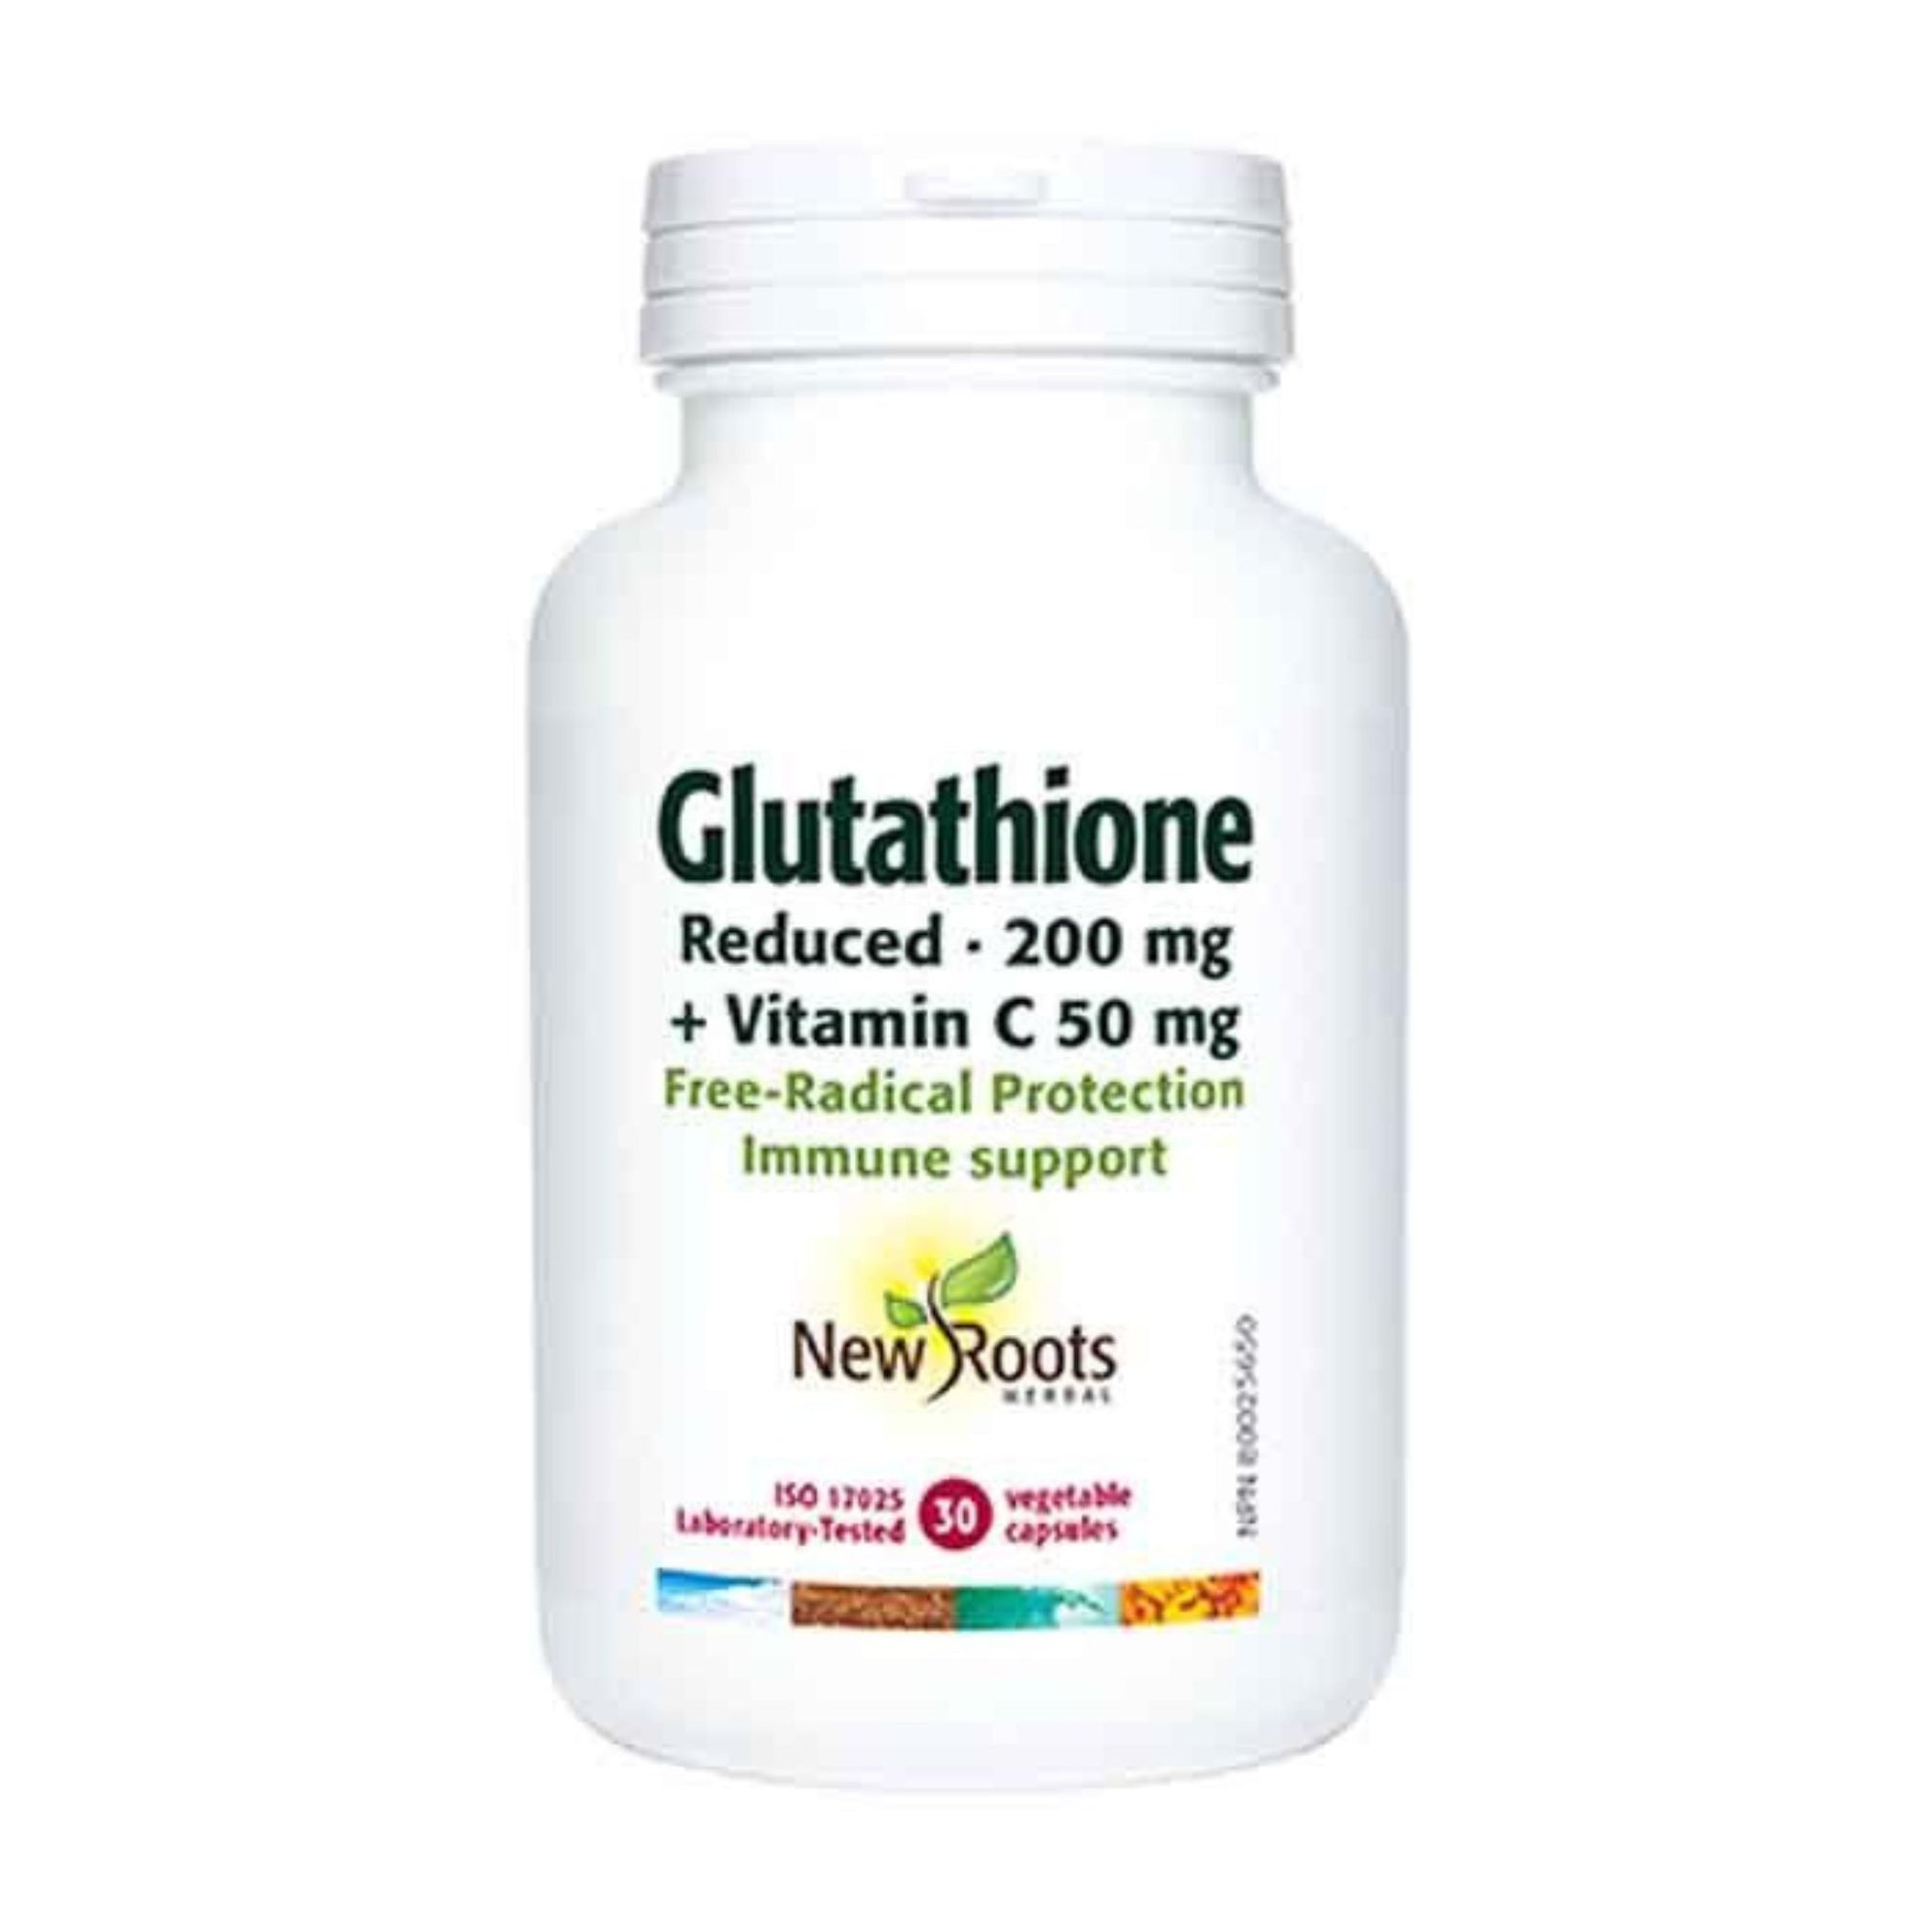 New Roots Glutatathione 200mg 30 Vegetable Capsules - with Vitamin C 50mg - free-radical protection and Immune support.